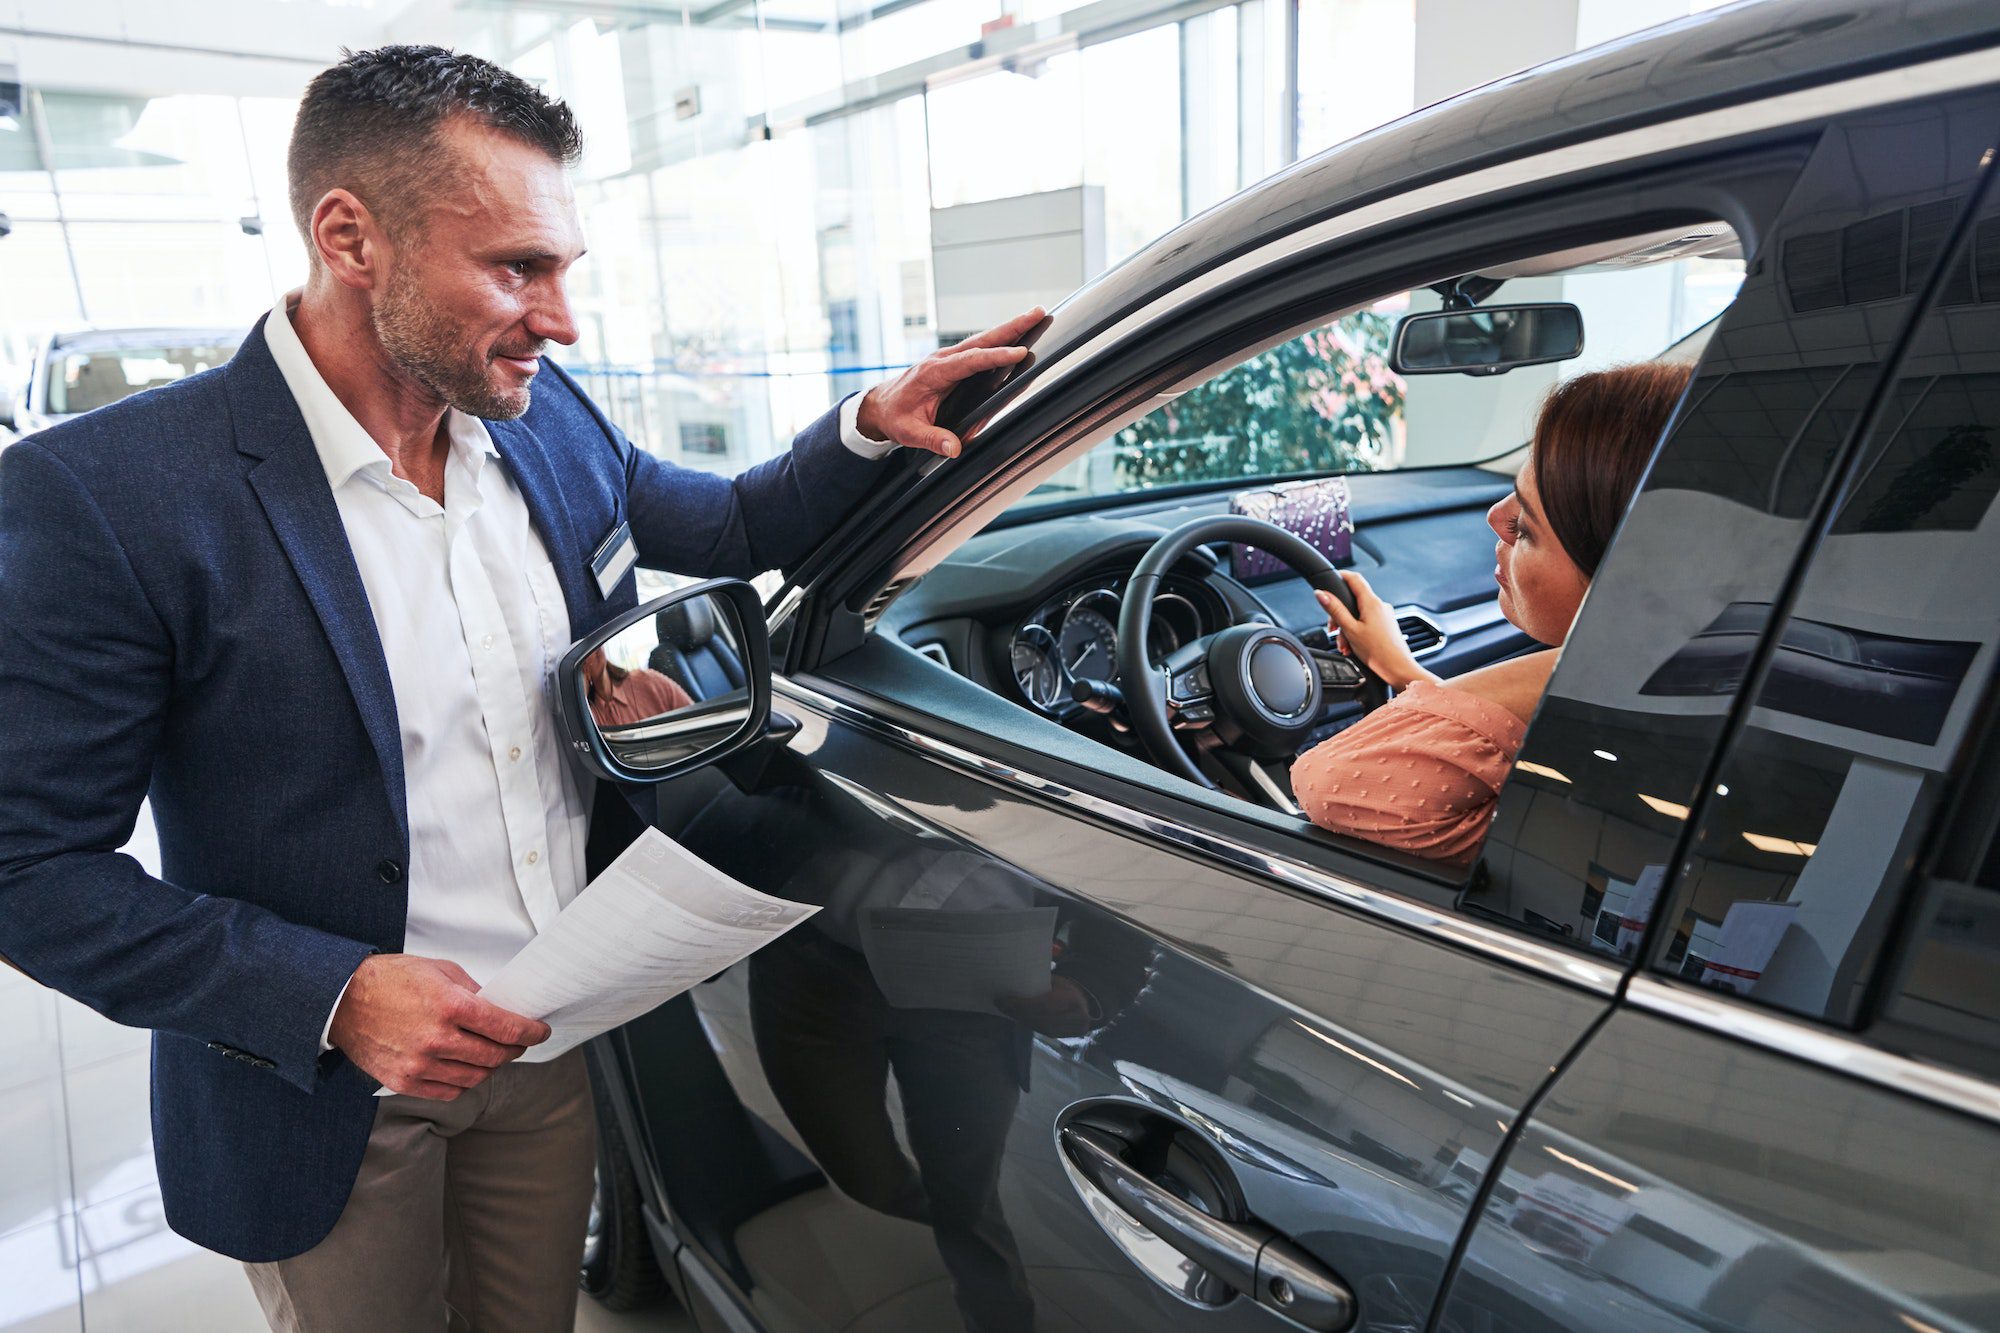 Improving Customer Experience As A Car Dealership General Manager